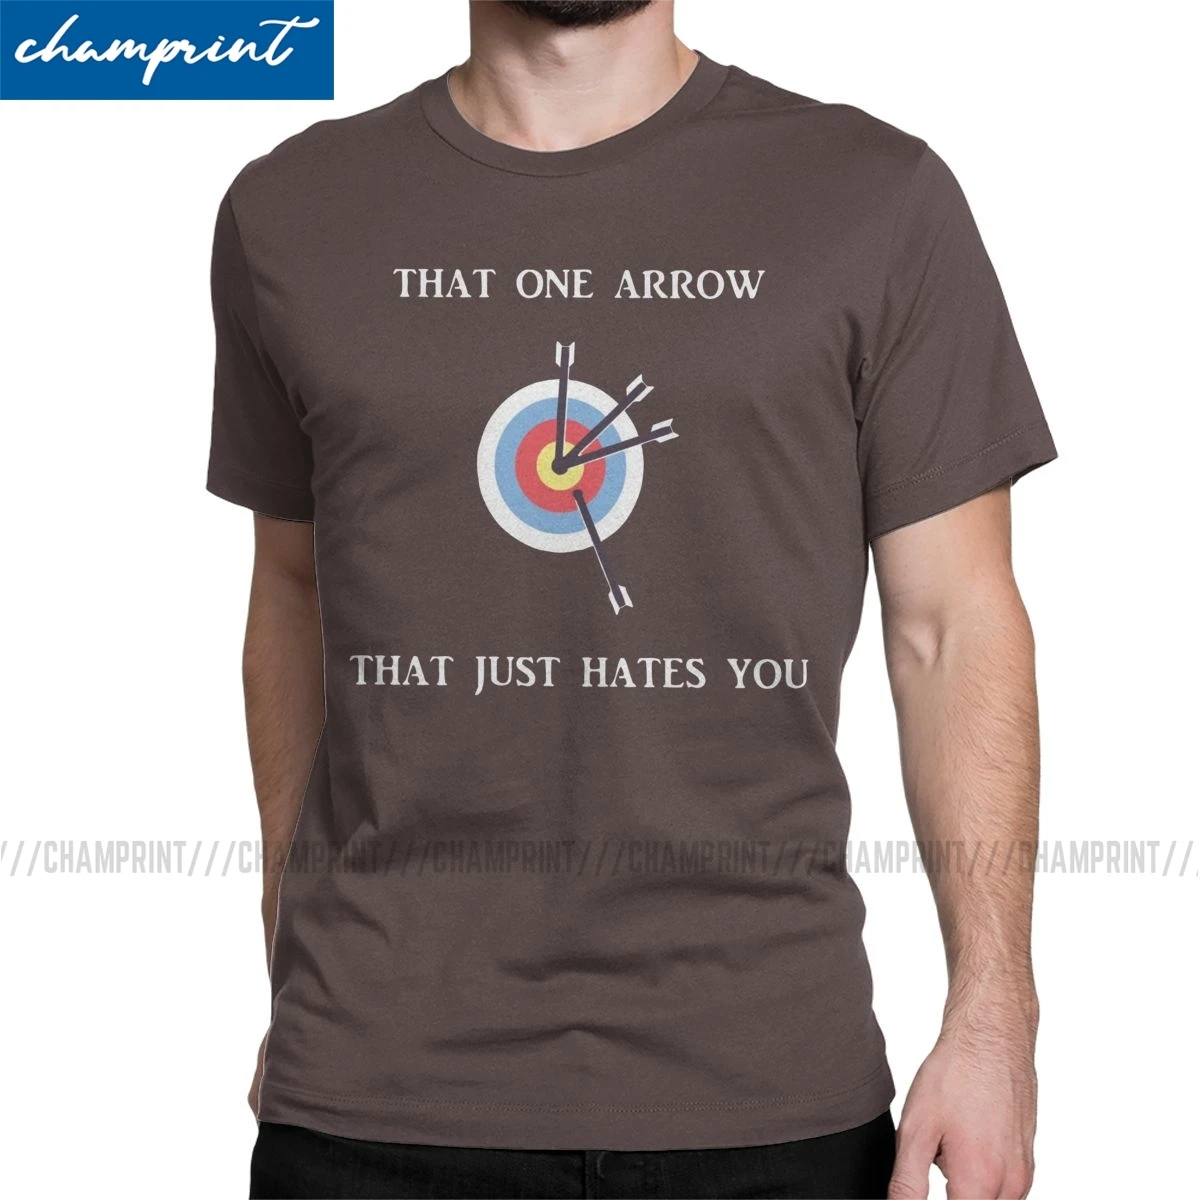 Archery Evolution T-shirt Shooting Arrows Competition Archer Bowmen Hunting Combat Funny Unisex Tops